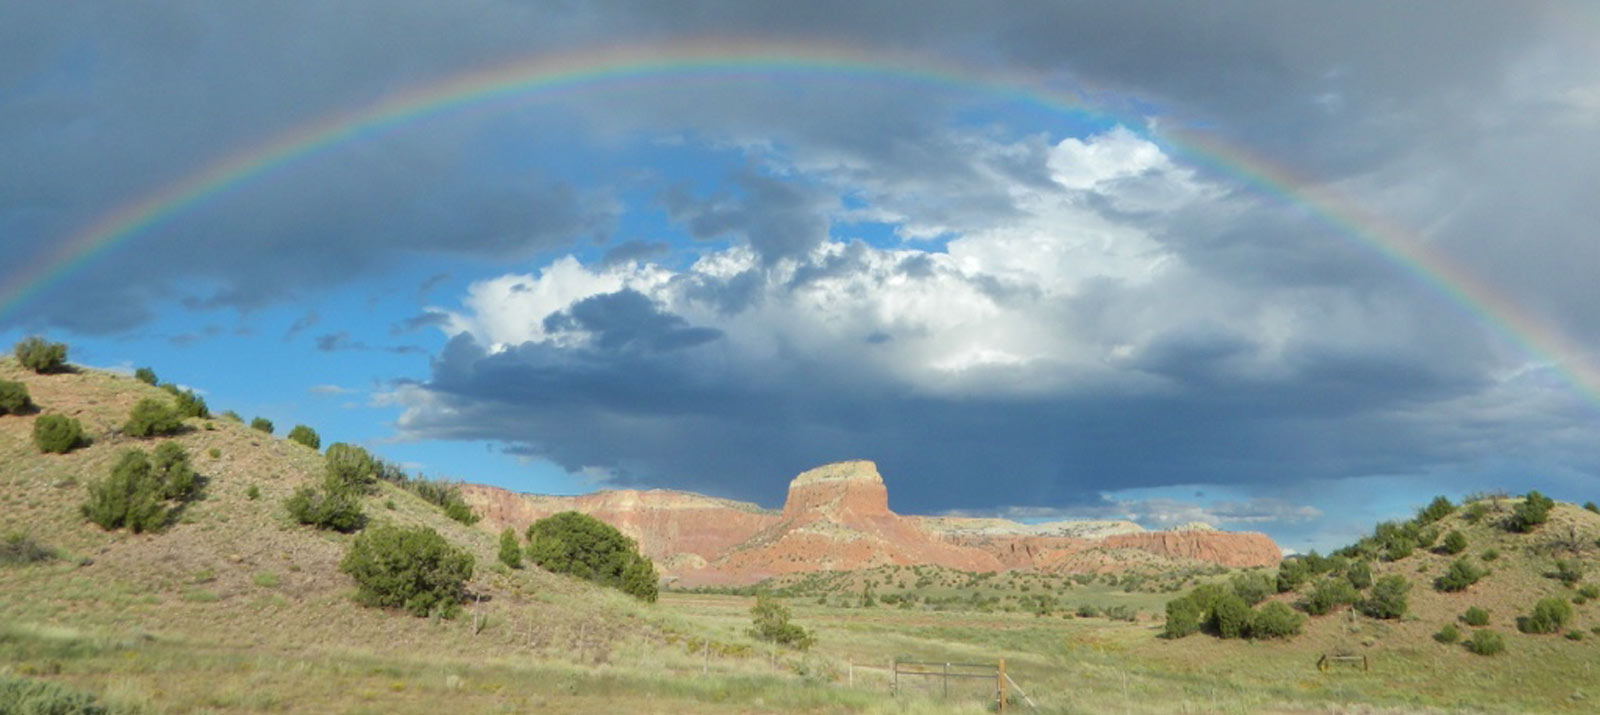 Rainbow Over Ghost Ranch